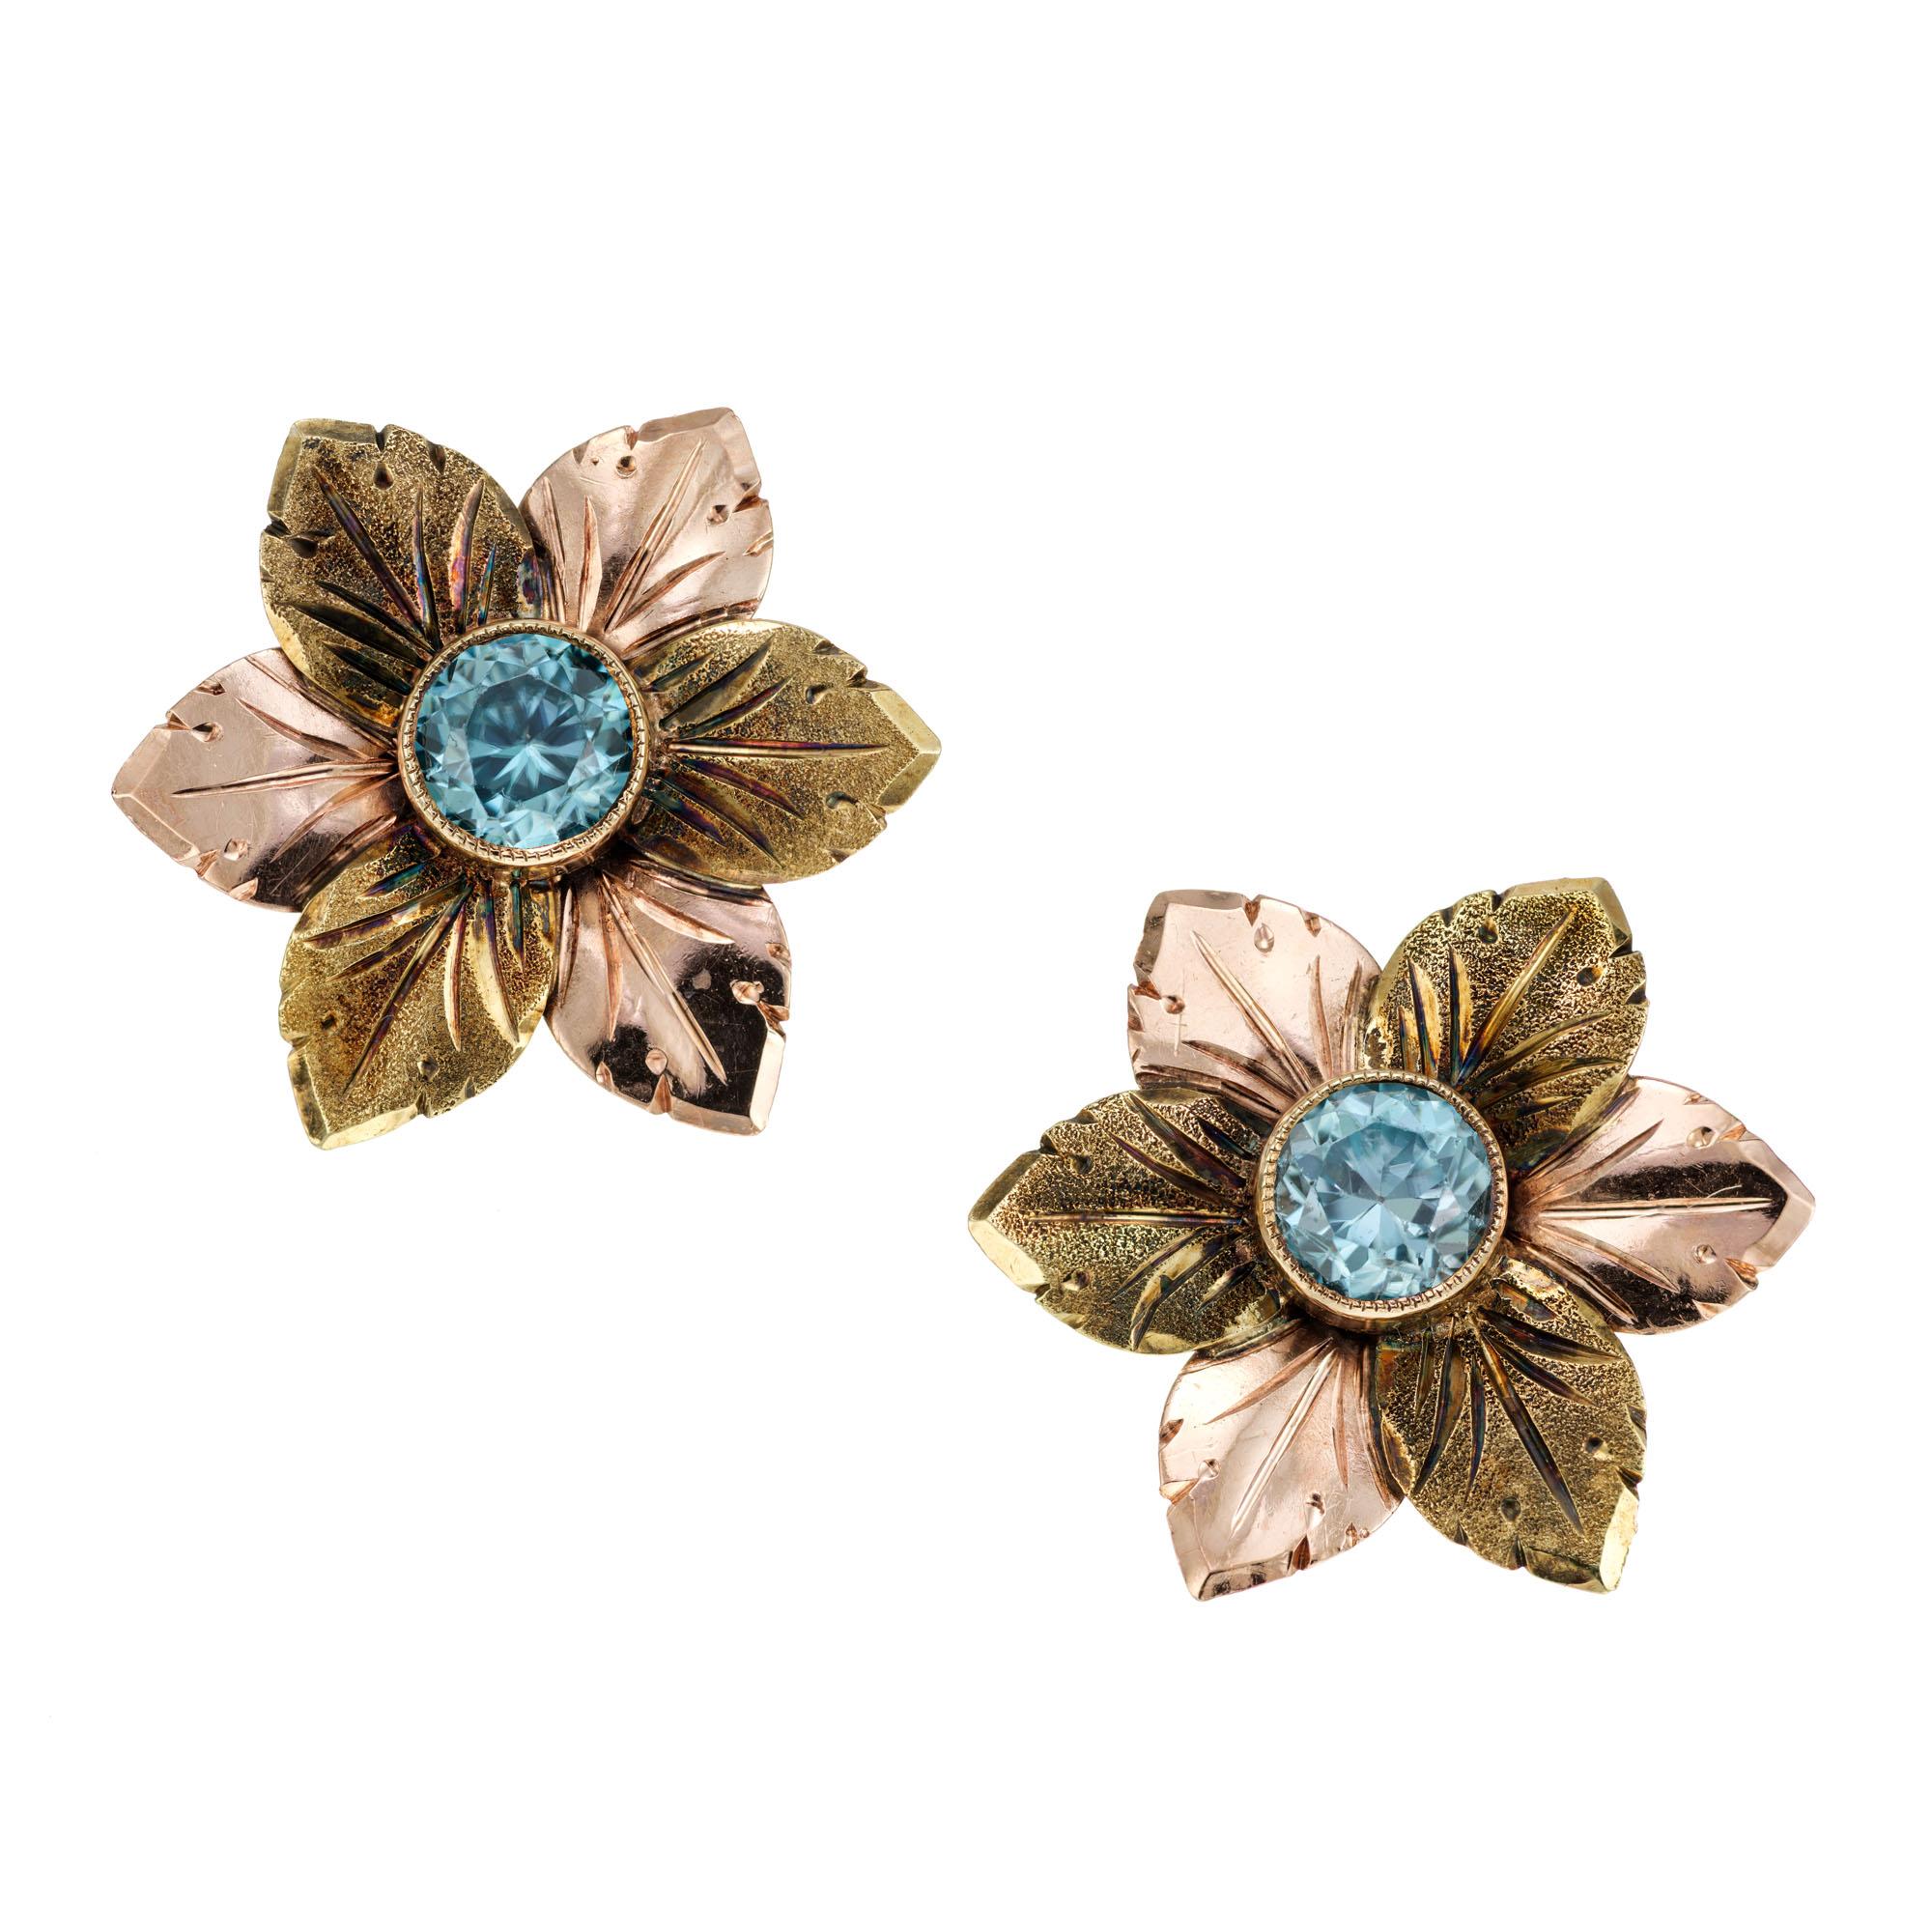 Handmade rose and green gold hand engraved flower earring and brooch set with genuine untreated bright blue round Zircons. Circa 1935.

4 round Blue Zircon approx. total weight 2.40cts
Stamped: 14k P & G
16.1 grams
Diameter of brooch: 1.62